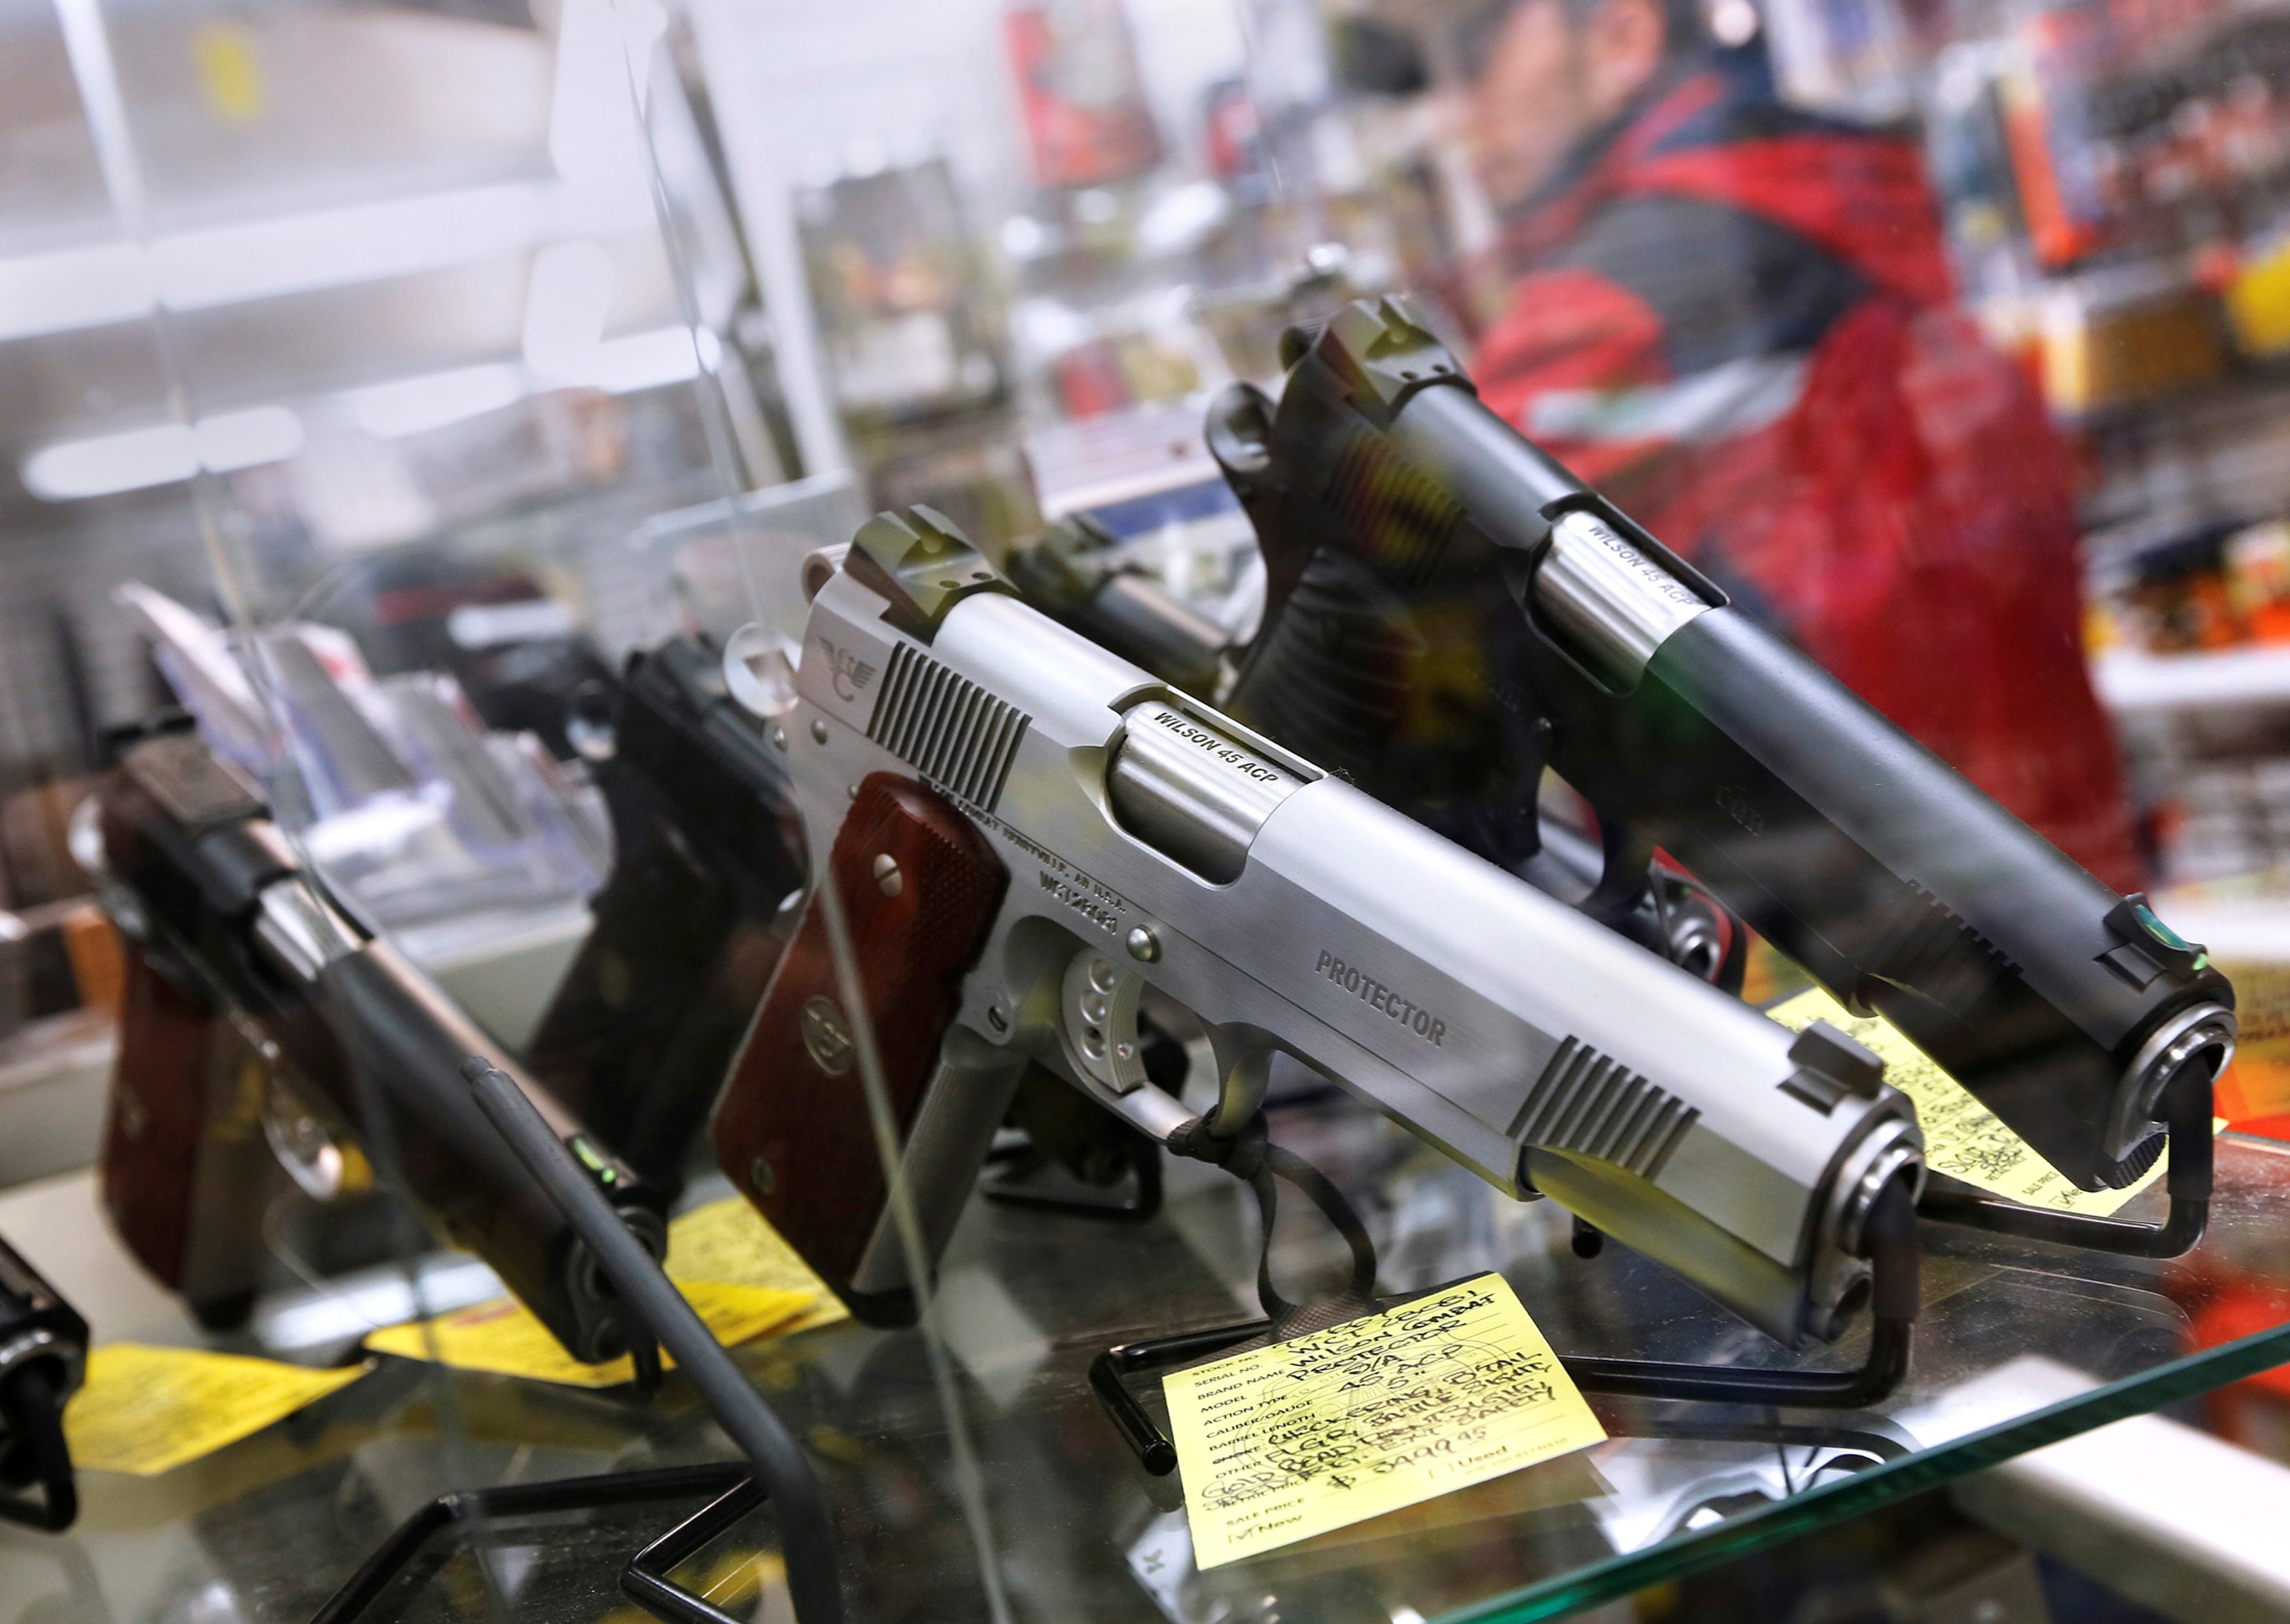 New York bans guns in many public places after Supreme Court ruling